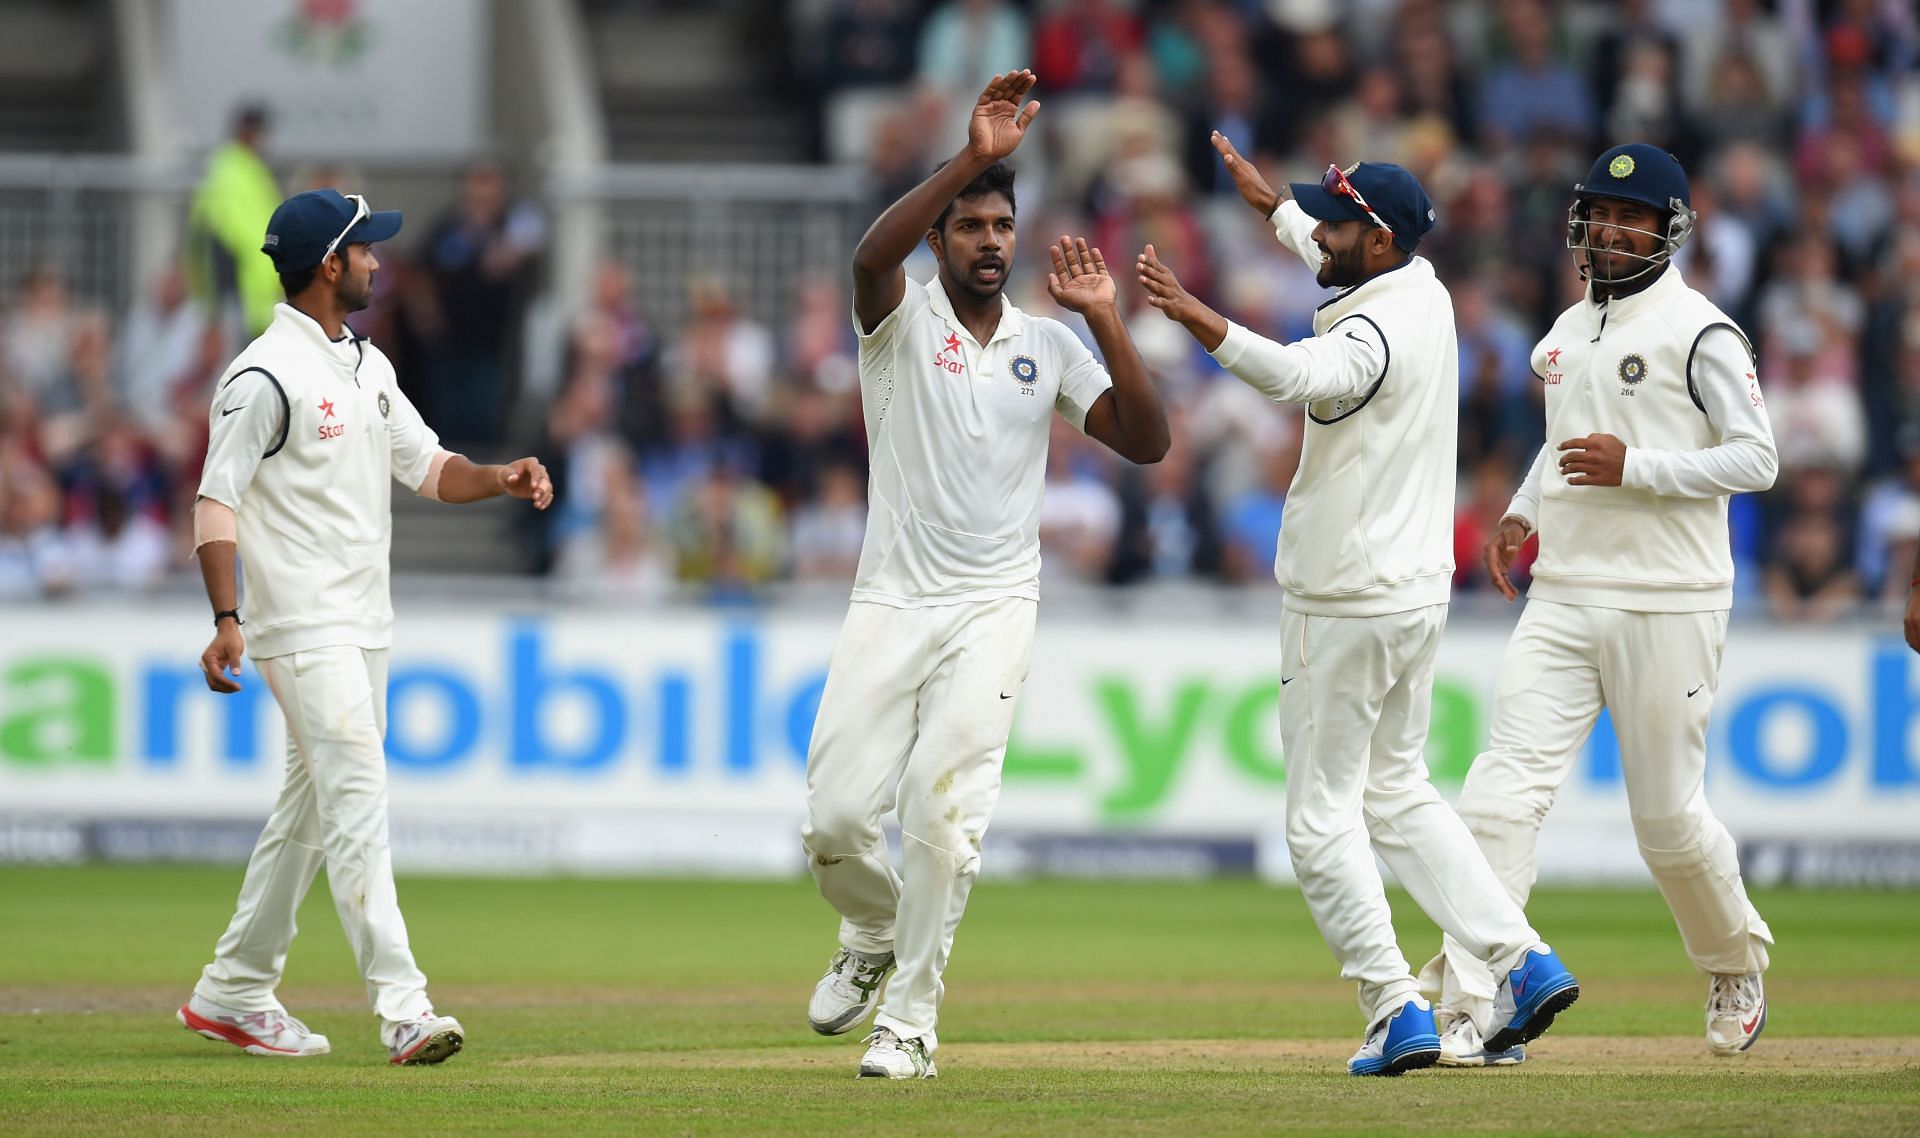 Varun Aaron has played nine Test matches for the Indian cricket team (Image: Getty)